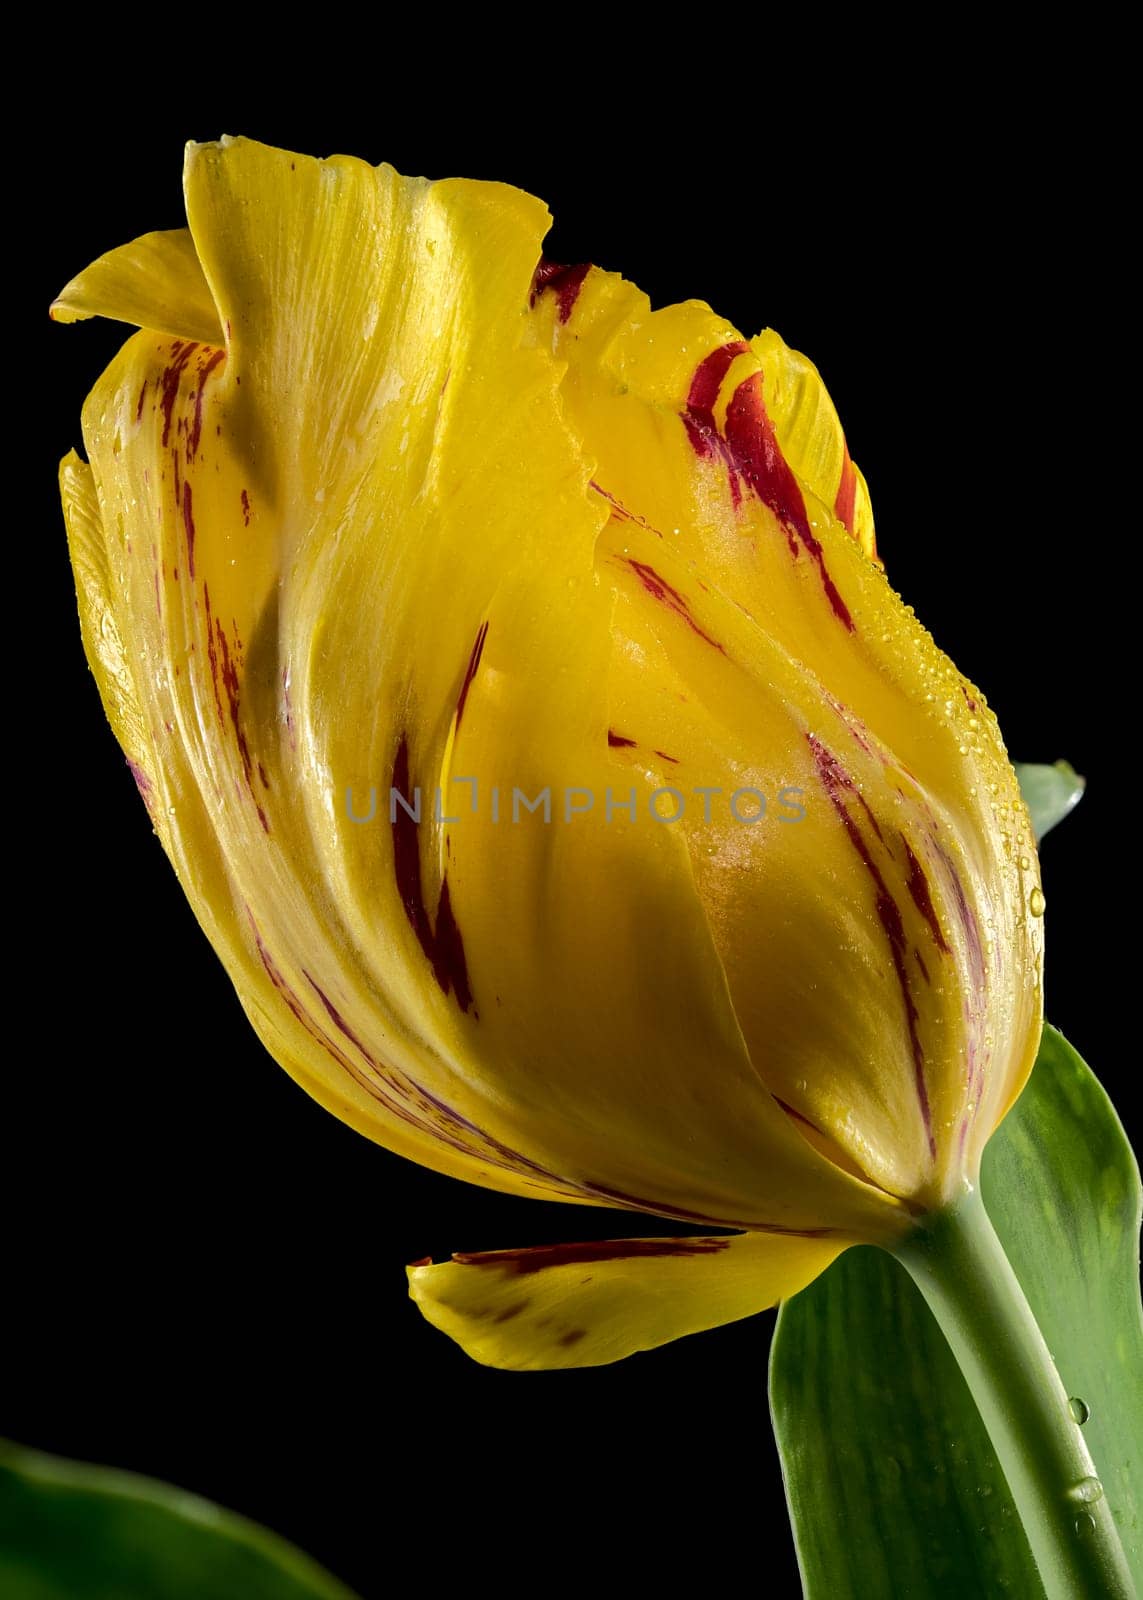 Blooming Tulip La Courtine Parrot on a black background by Multipedia